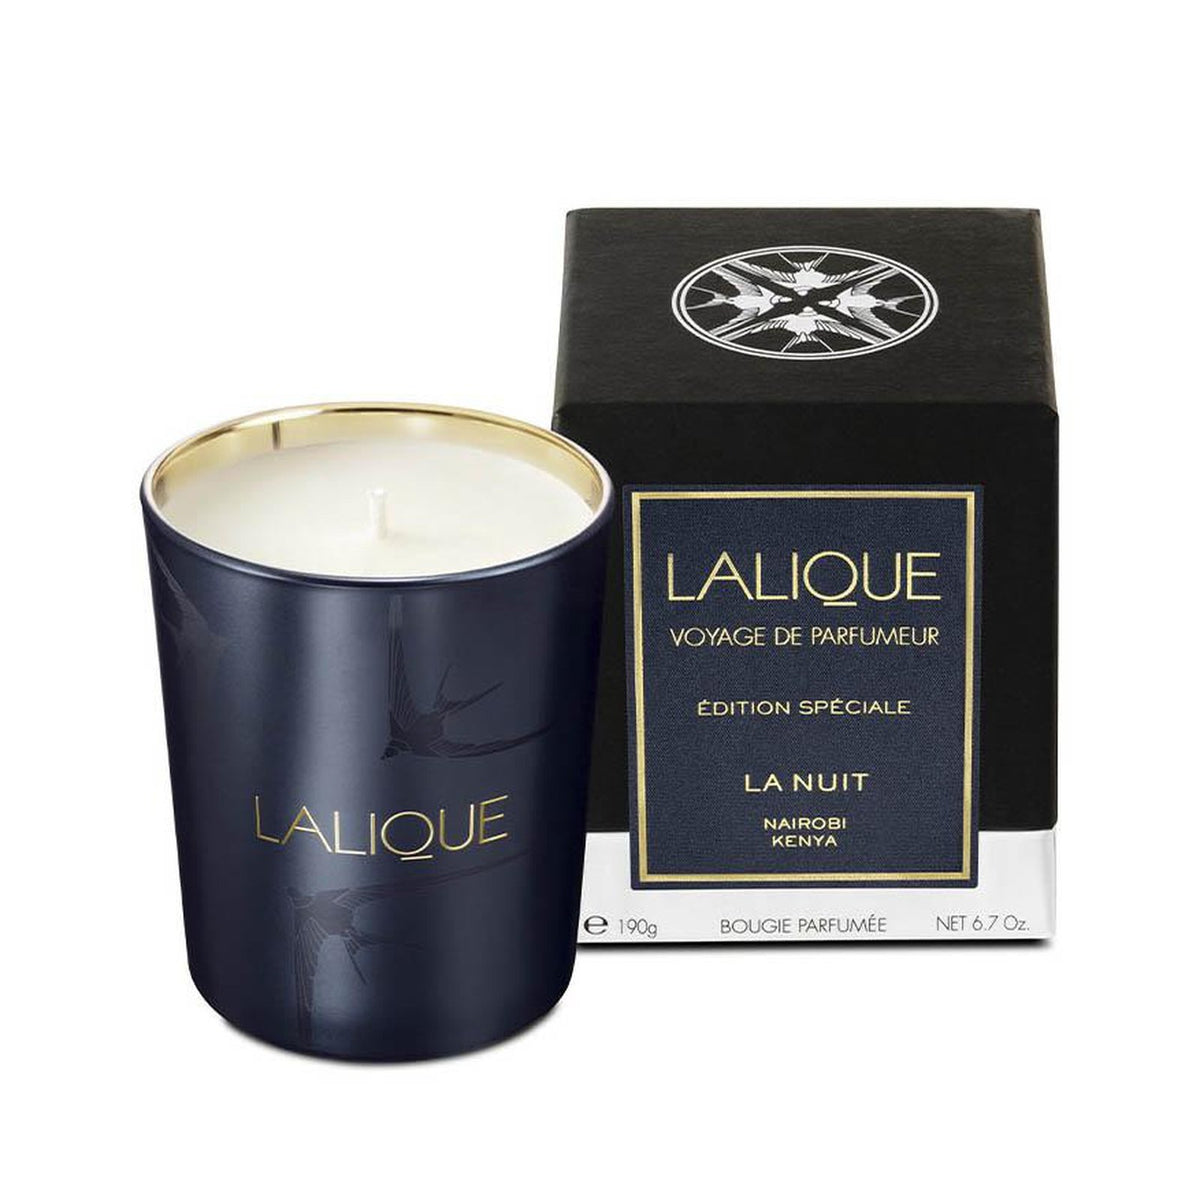 Lalique The Night Nairobi - Kenya Scented Candle — Grayson Living